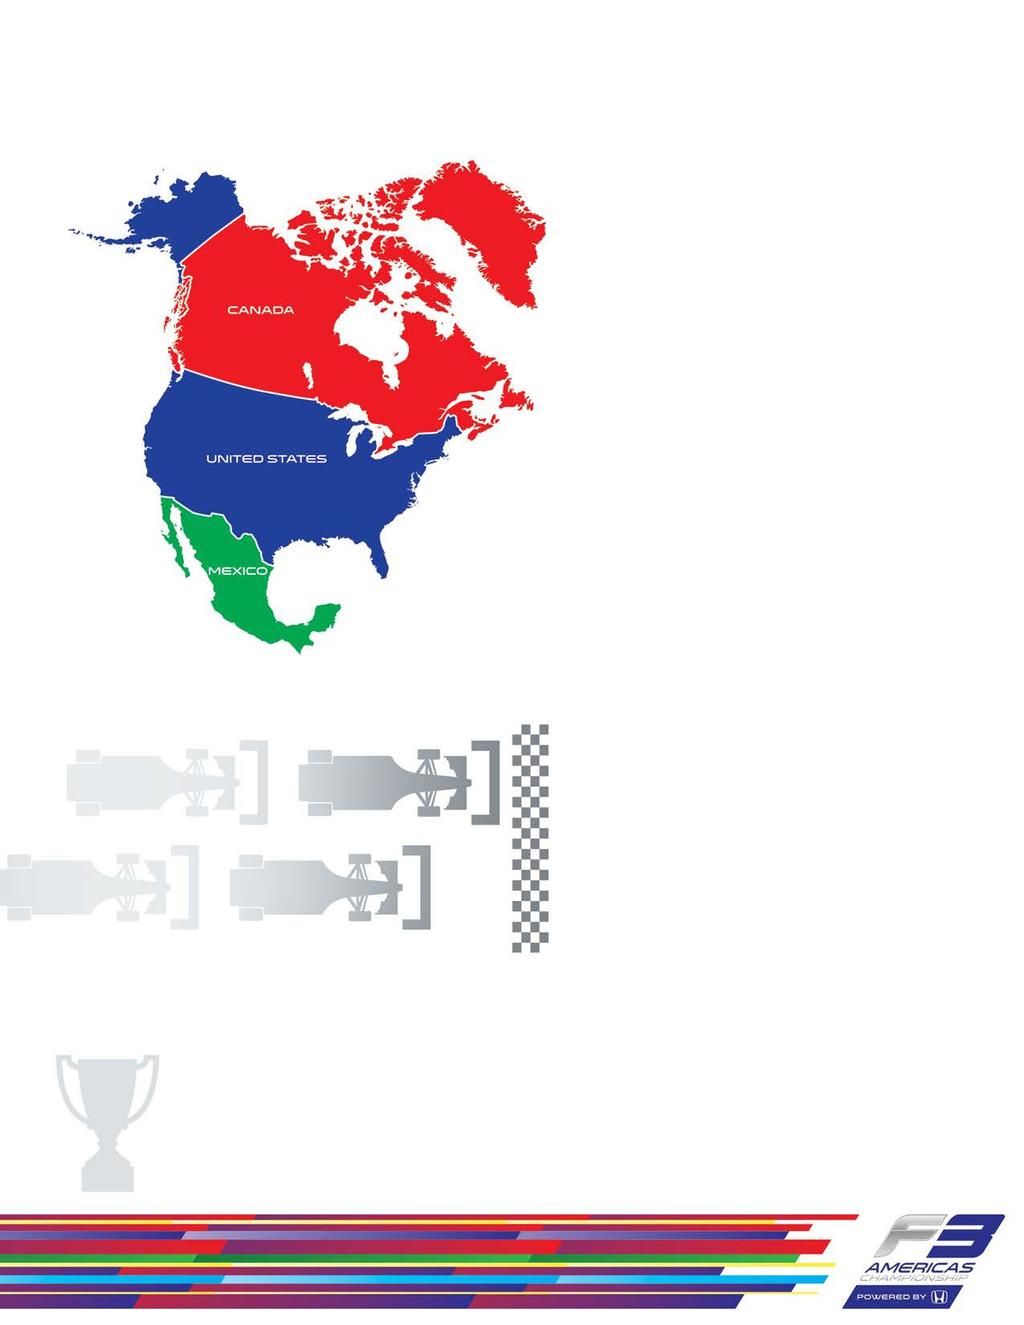 #f3americas schedule 4 TheF3 Americas Championship is a regional FIA F3 series, meaning thatitencompasses all of North America and